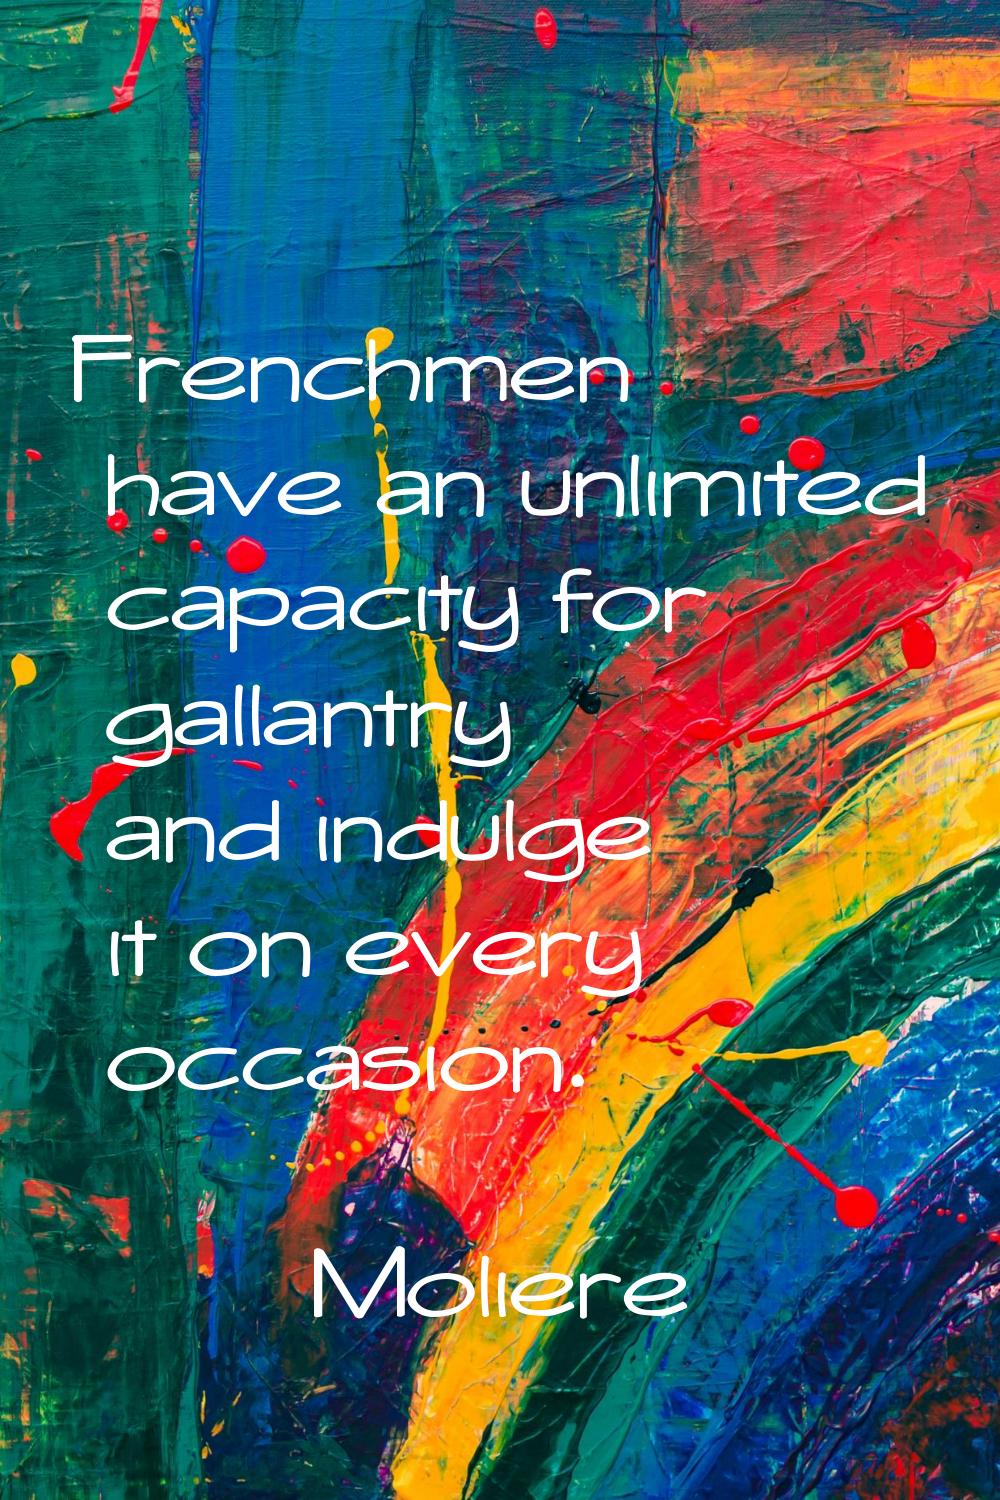 Frenchmen have an unlimited capacity for gallantry and indulge it on every occasion.